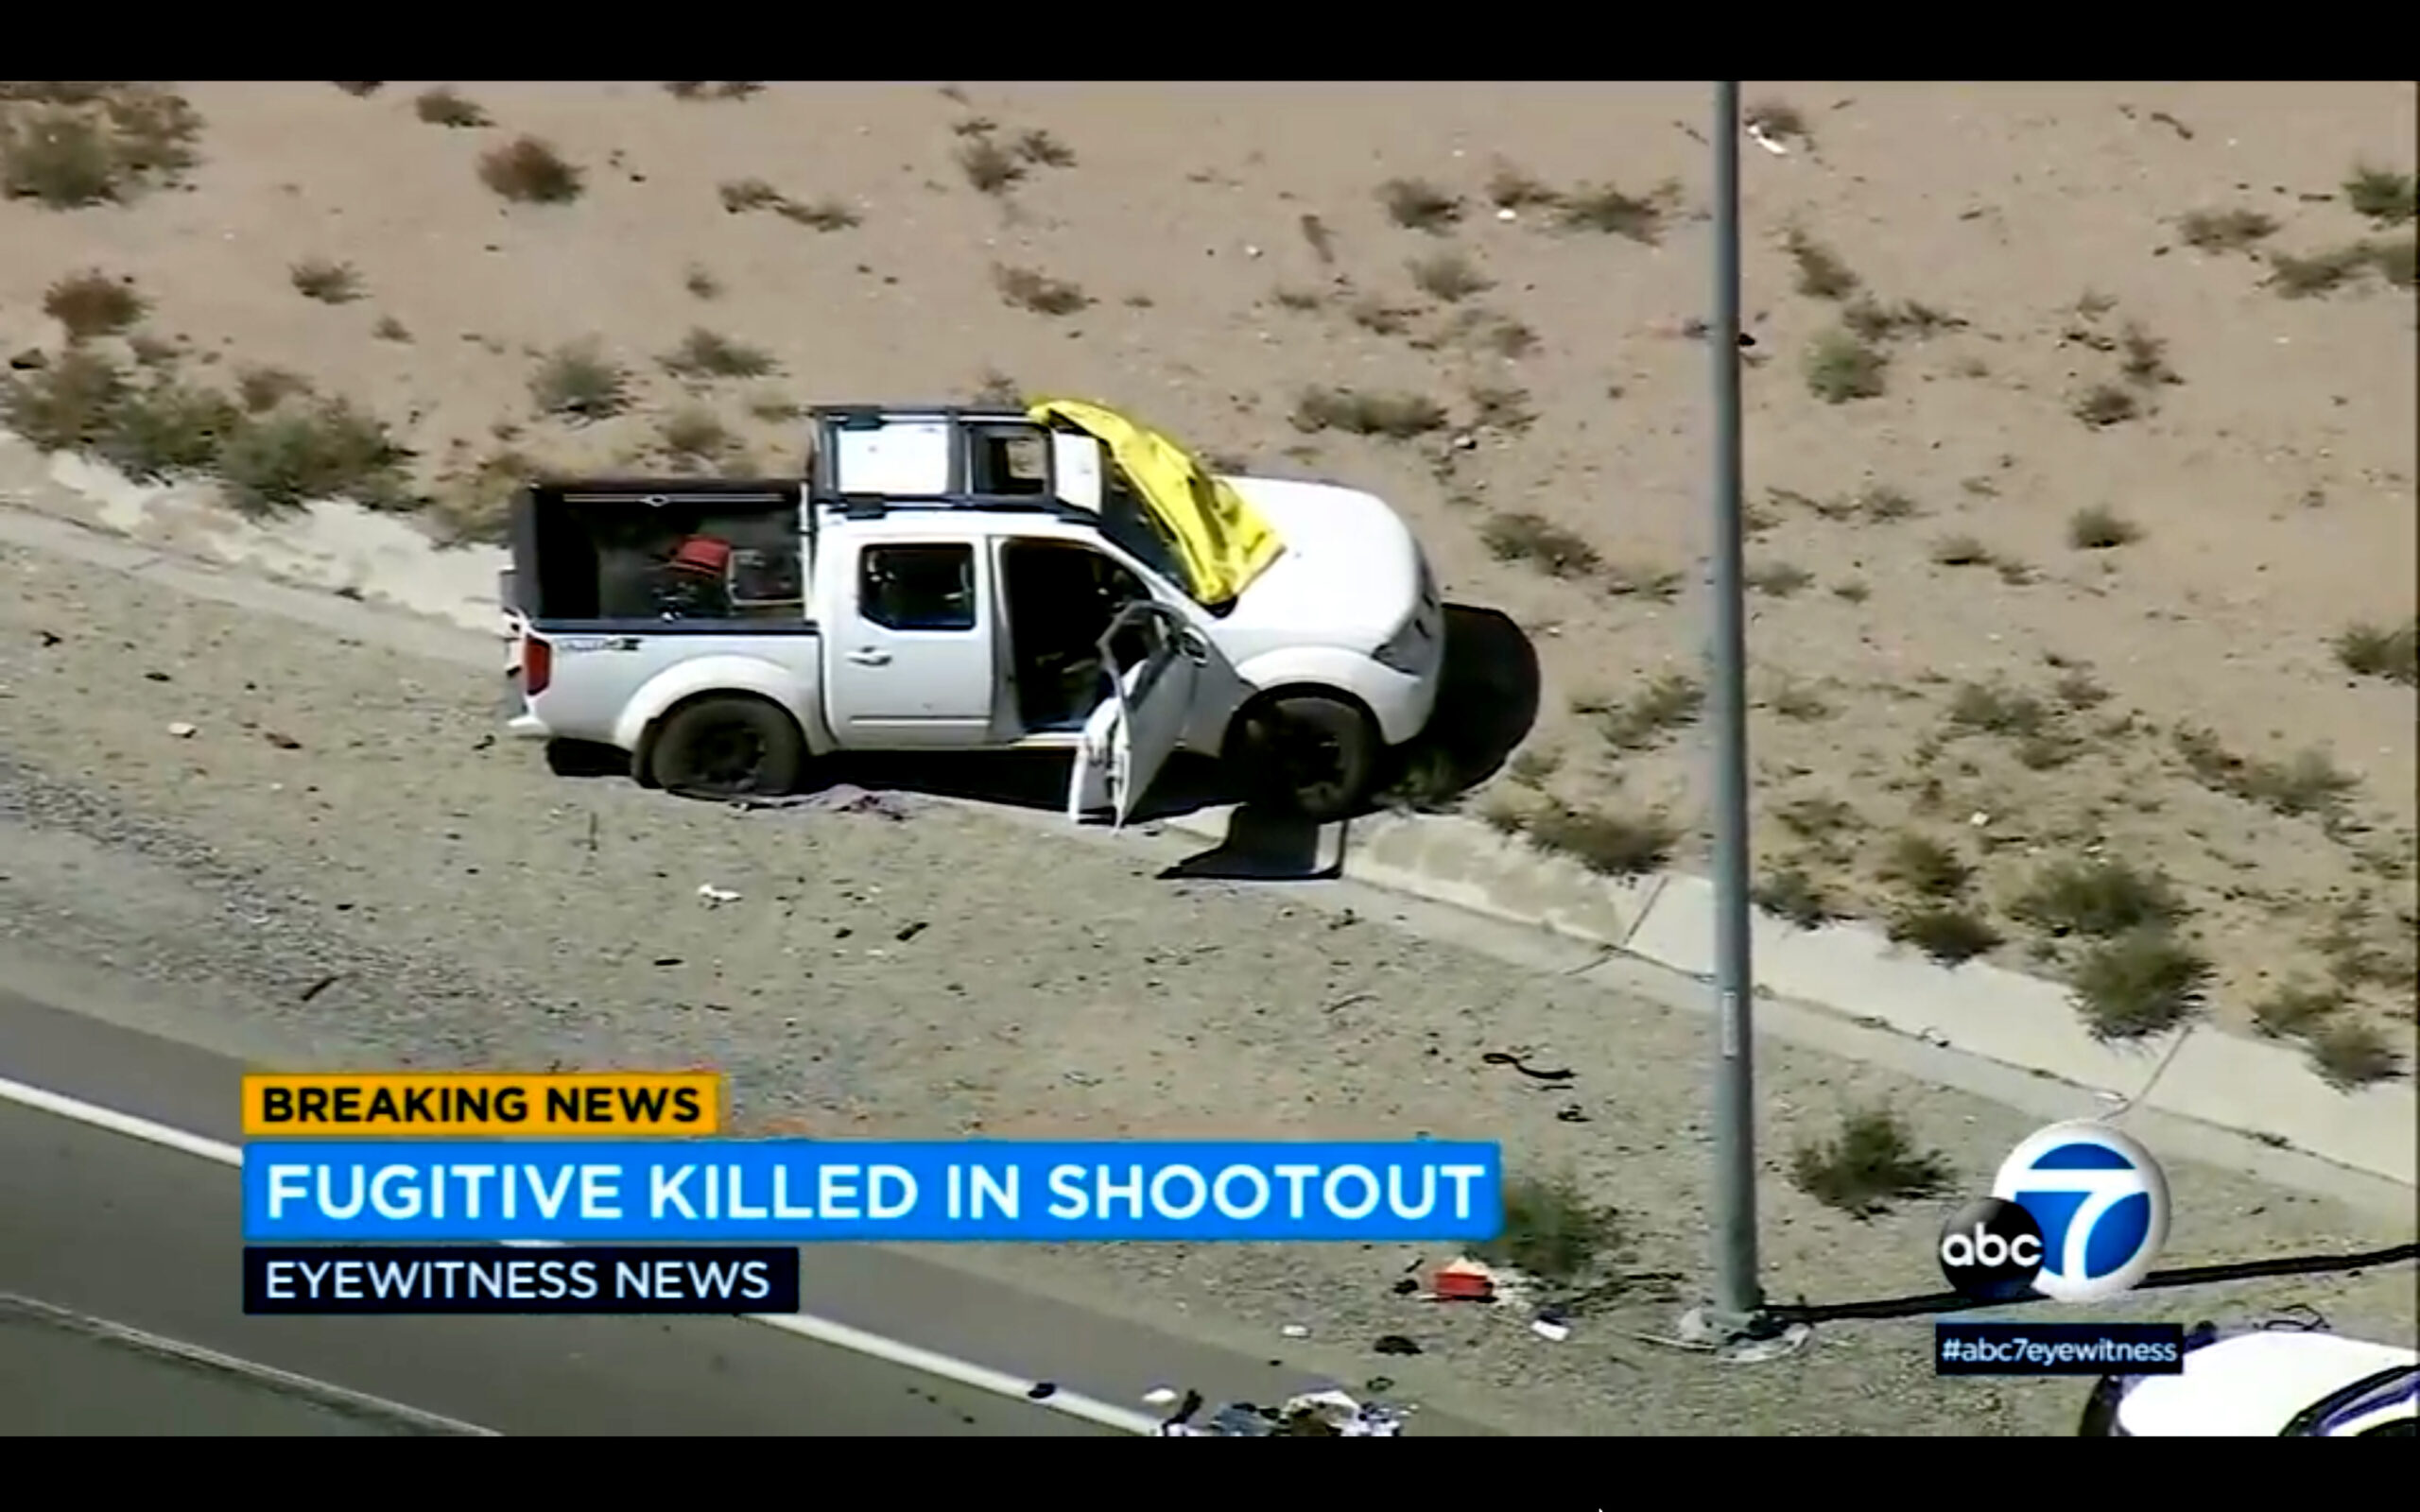 This image from video provided by KABC-TV shows a truck owned by Anthony John Graziano after a shootout on a highway in Hesperia, Calif., on Tuesday, Sept. 27, 2022. The Southern California man who was accused of killing his estranged wife and abducting their 15-year-old daughter had been living with the teenager out of his pickup truck and hotels for weeks before the violence, authorities said Wednesday, Sept. 28, 2022. (KABC-TV via AP)